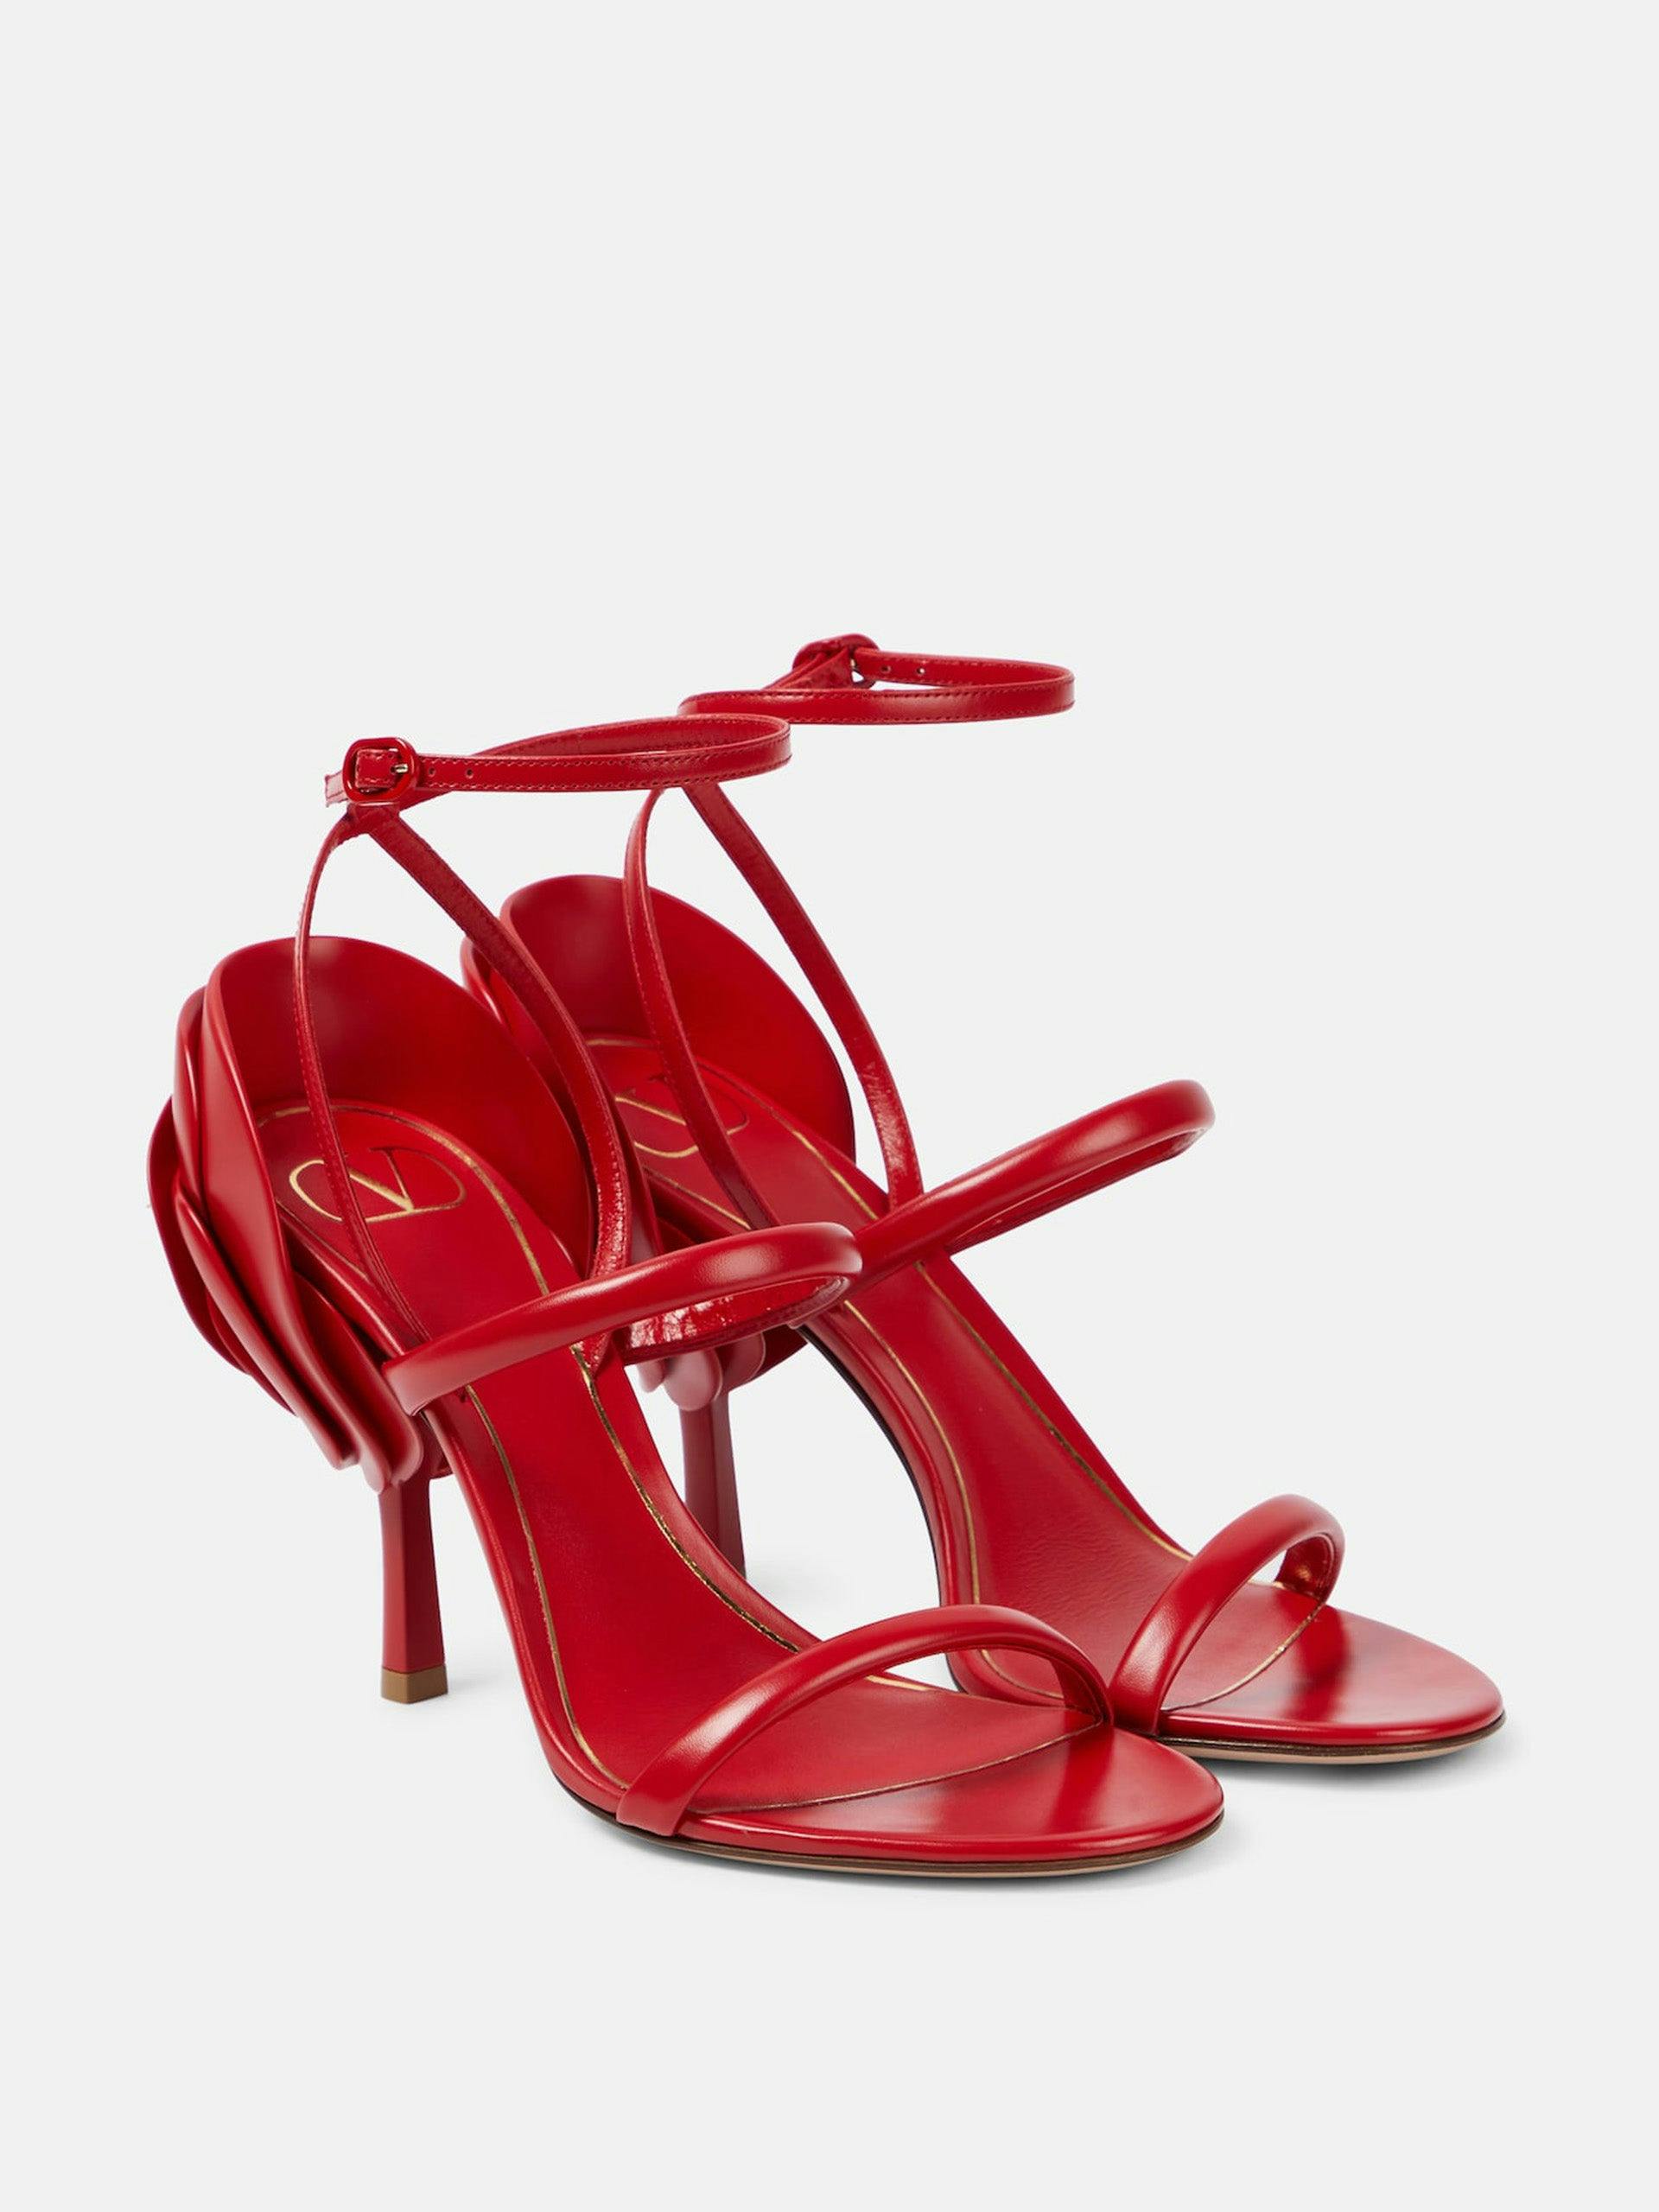 Roserouche 1959 leather sandals